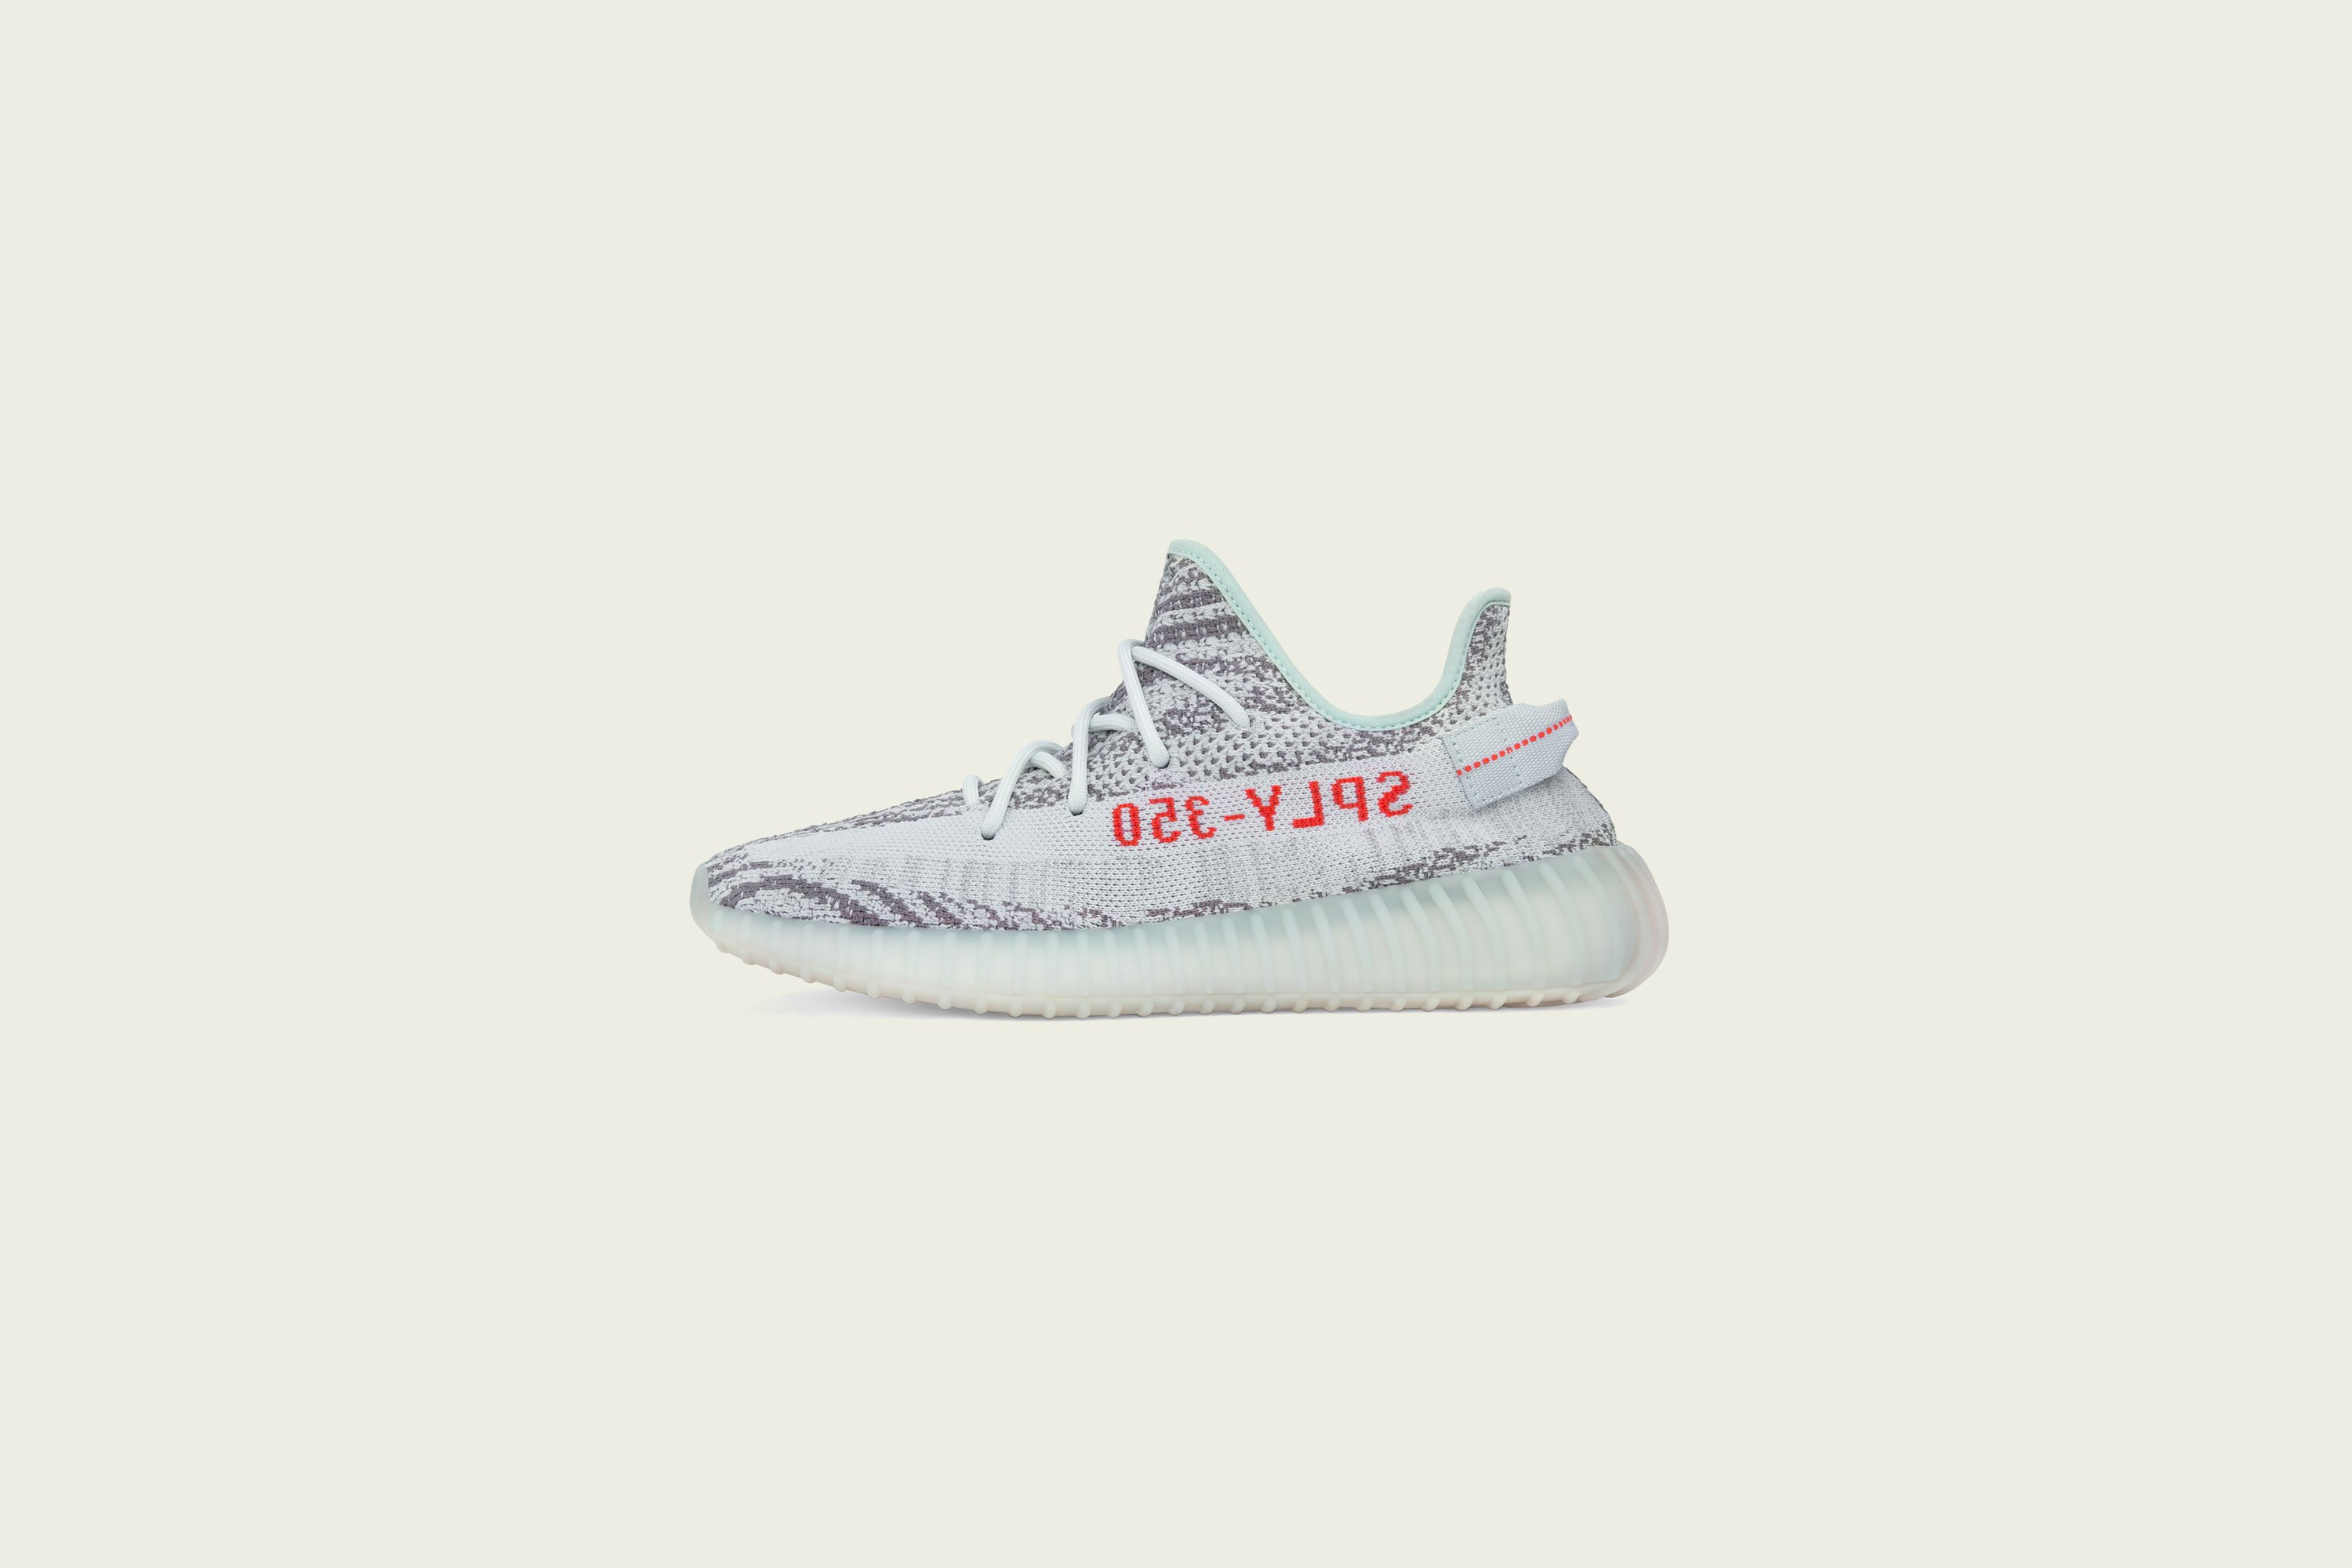 adidas - Yeezy Boost 350v2 - Blue Tint - Up There